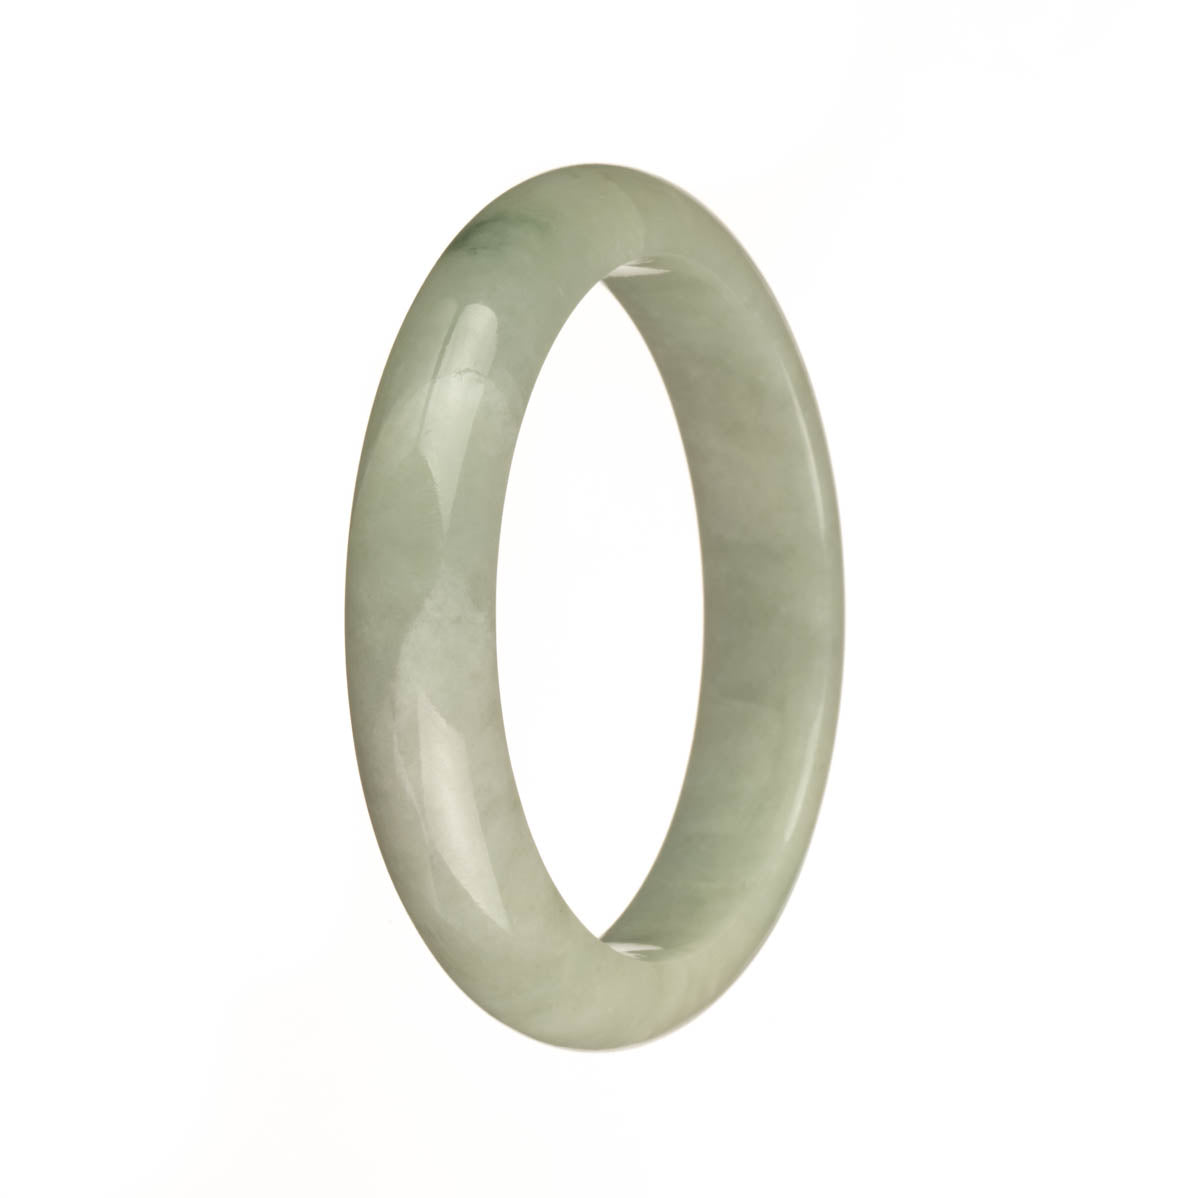 A beautiful genuine Type A White with Green Patch Burma Jade Bracelet, featuring a 55mm Half Moon design. Perfect for adding a touch of elegance to any outfit.